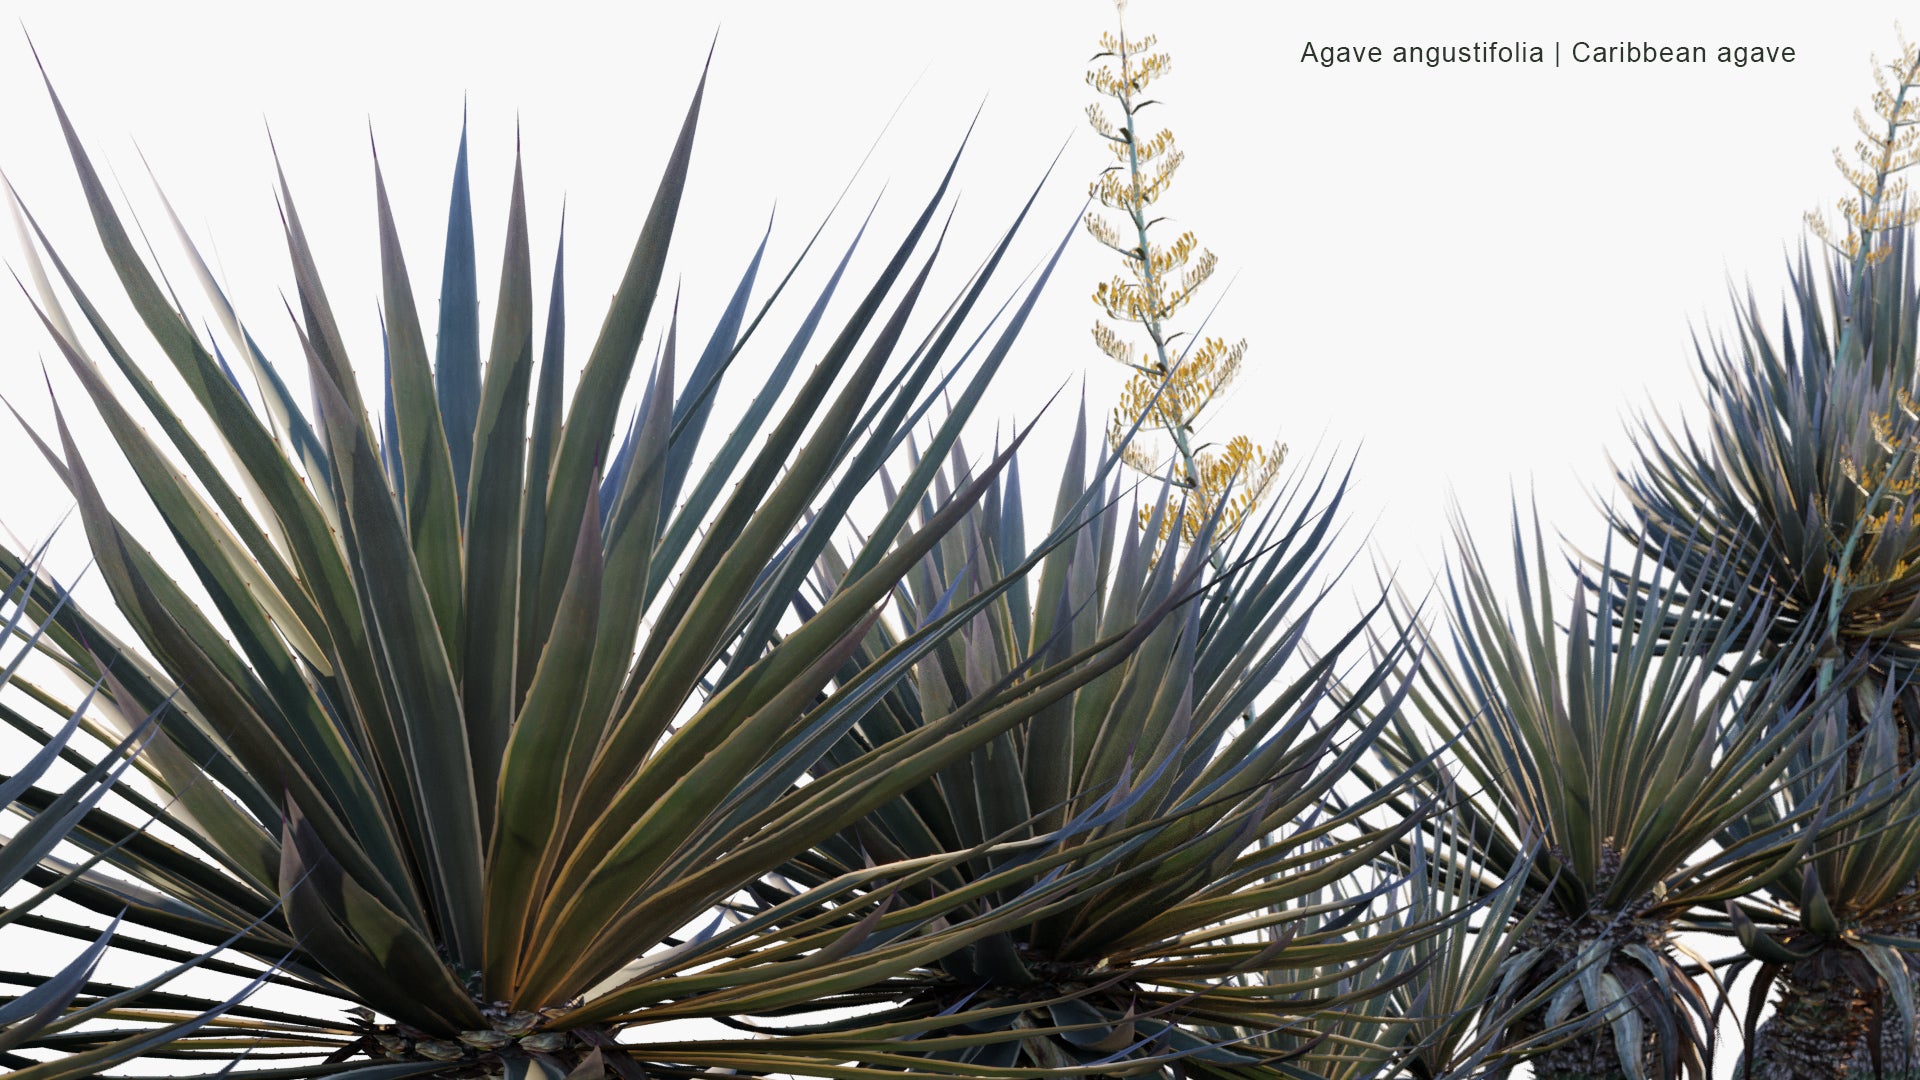 Low Poly Agave Angustifolia - Caribbean Agave (3D Model)